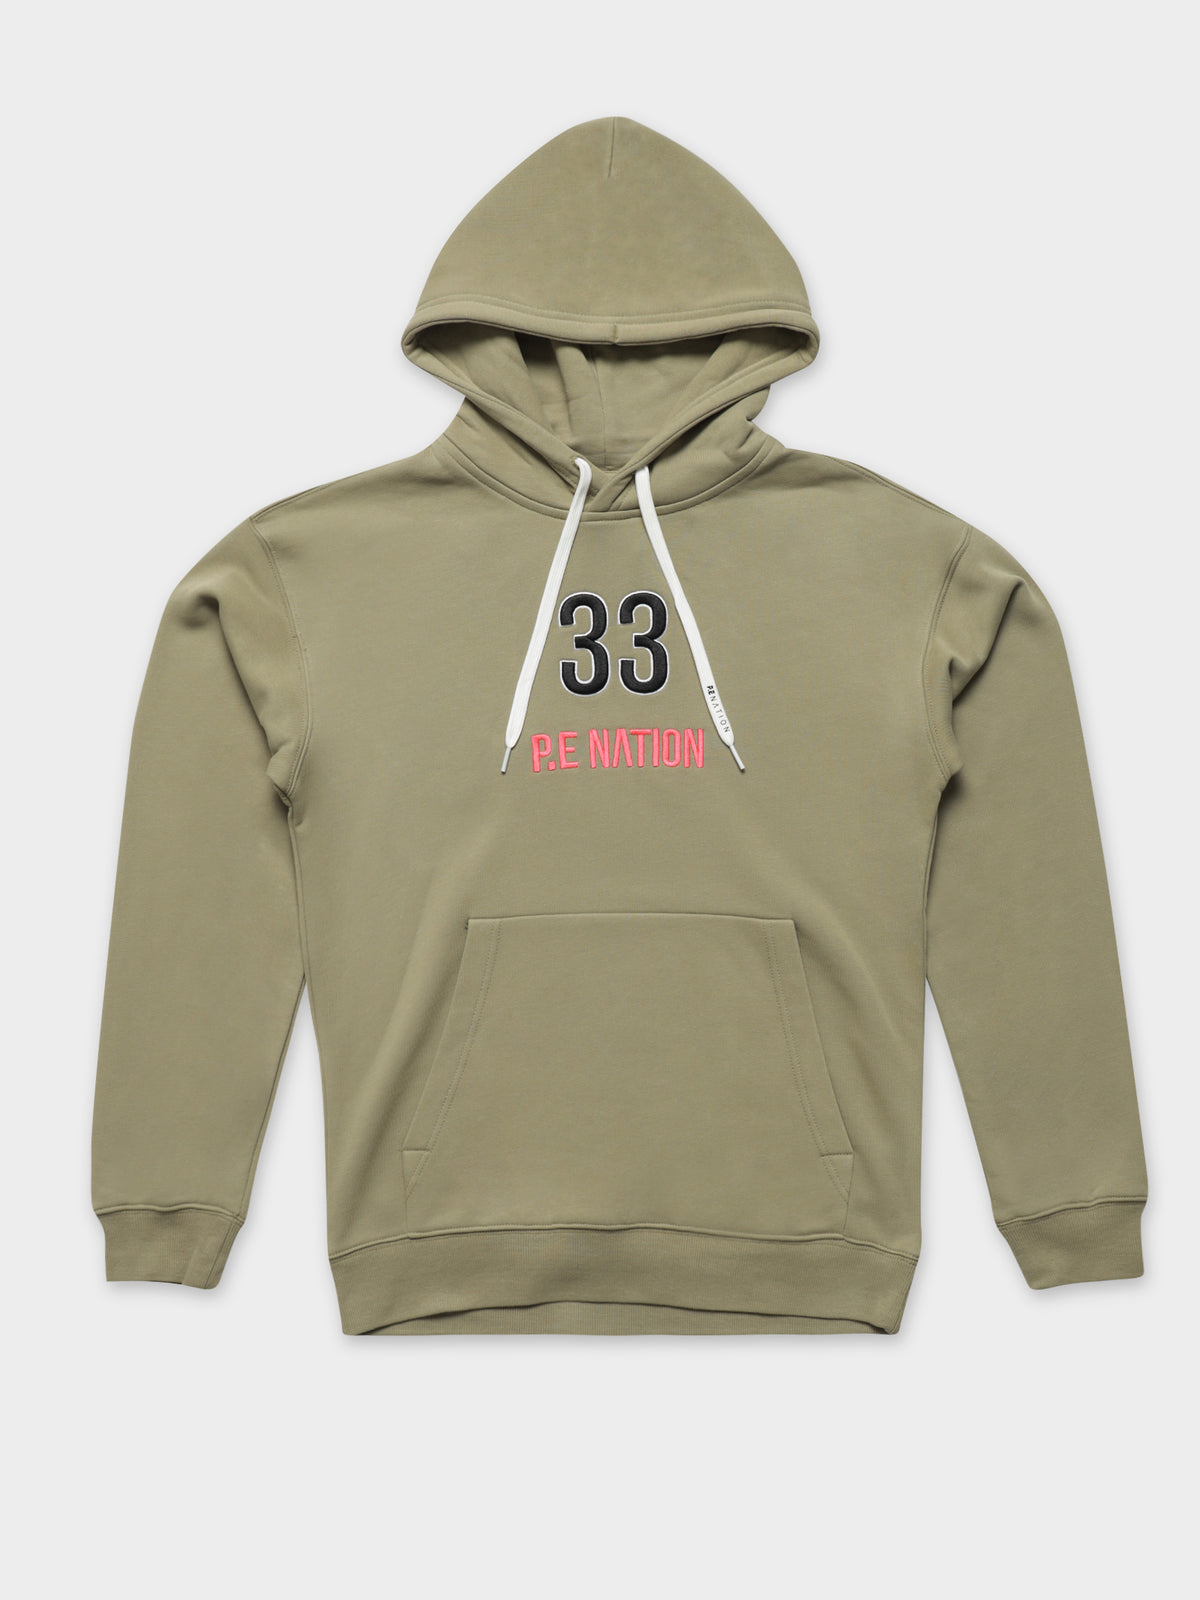 Double Team Hoodie in Olive Gray